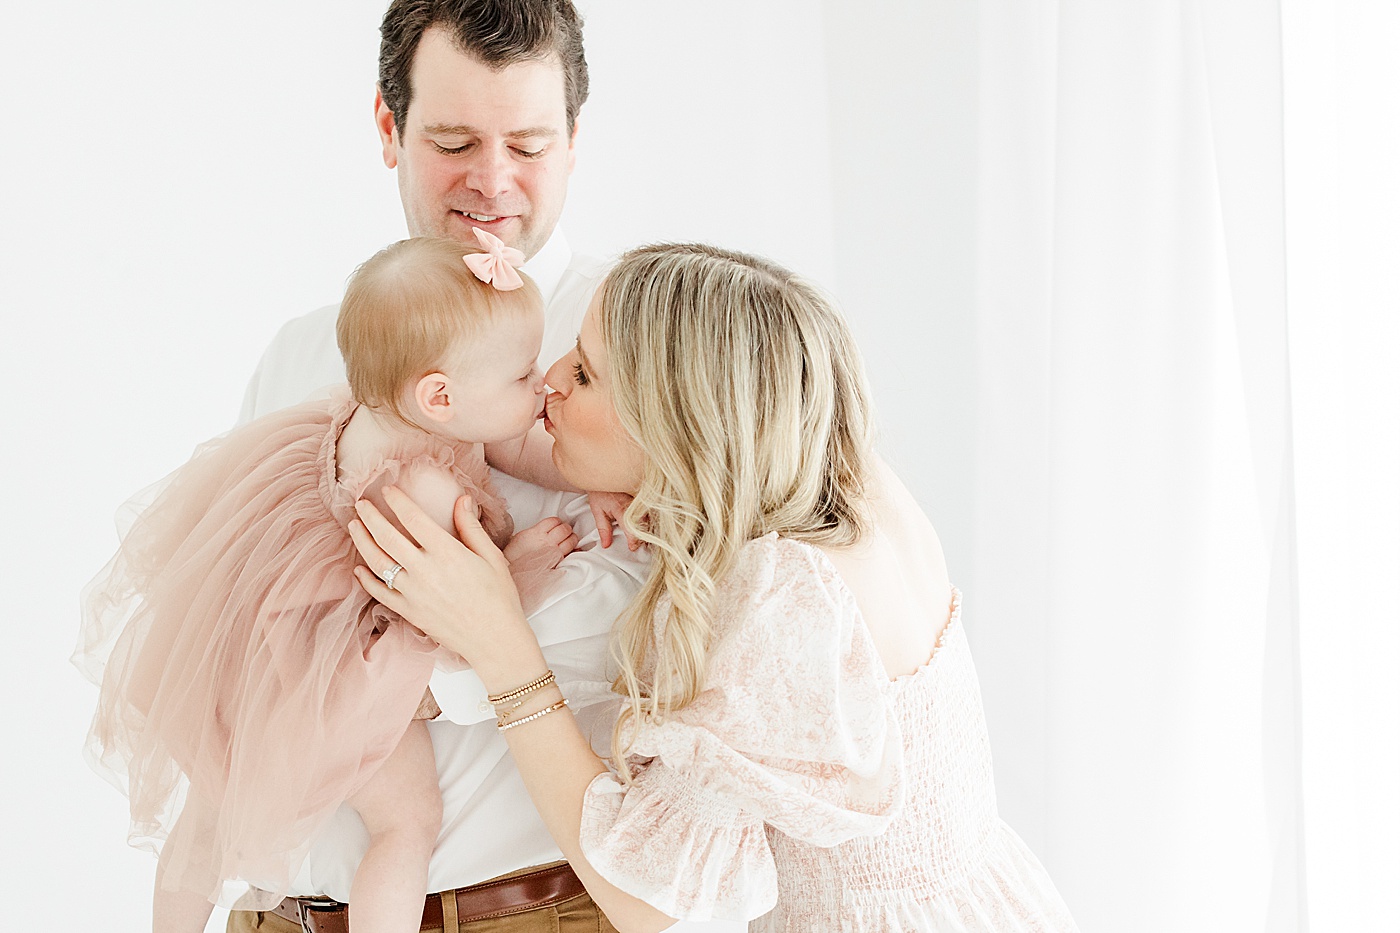 Mom kissing daughter during first birthday photoshoot | Kristin Wood Photography